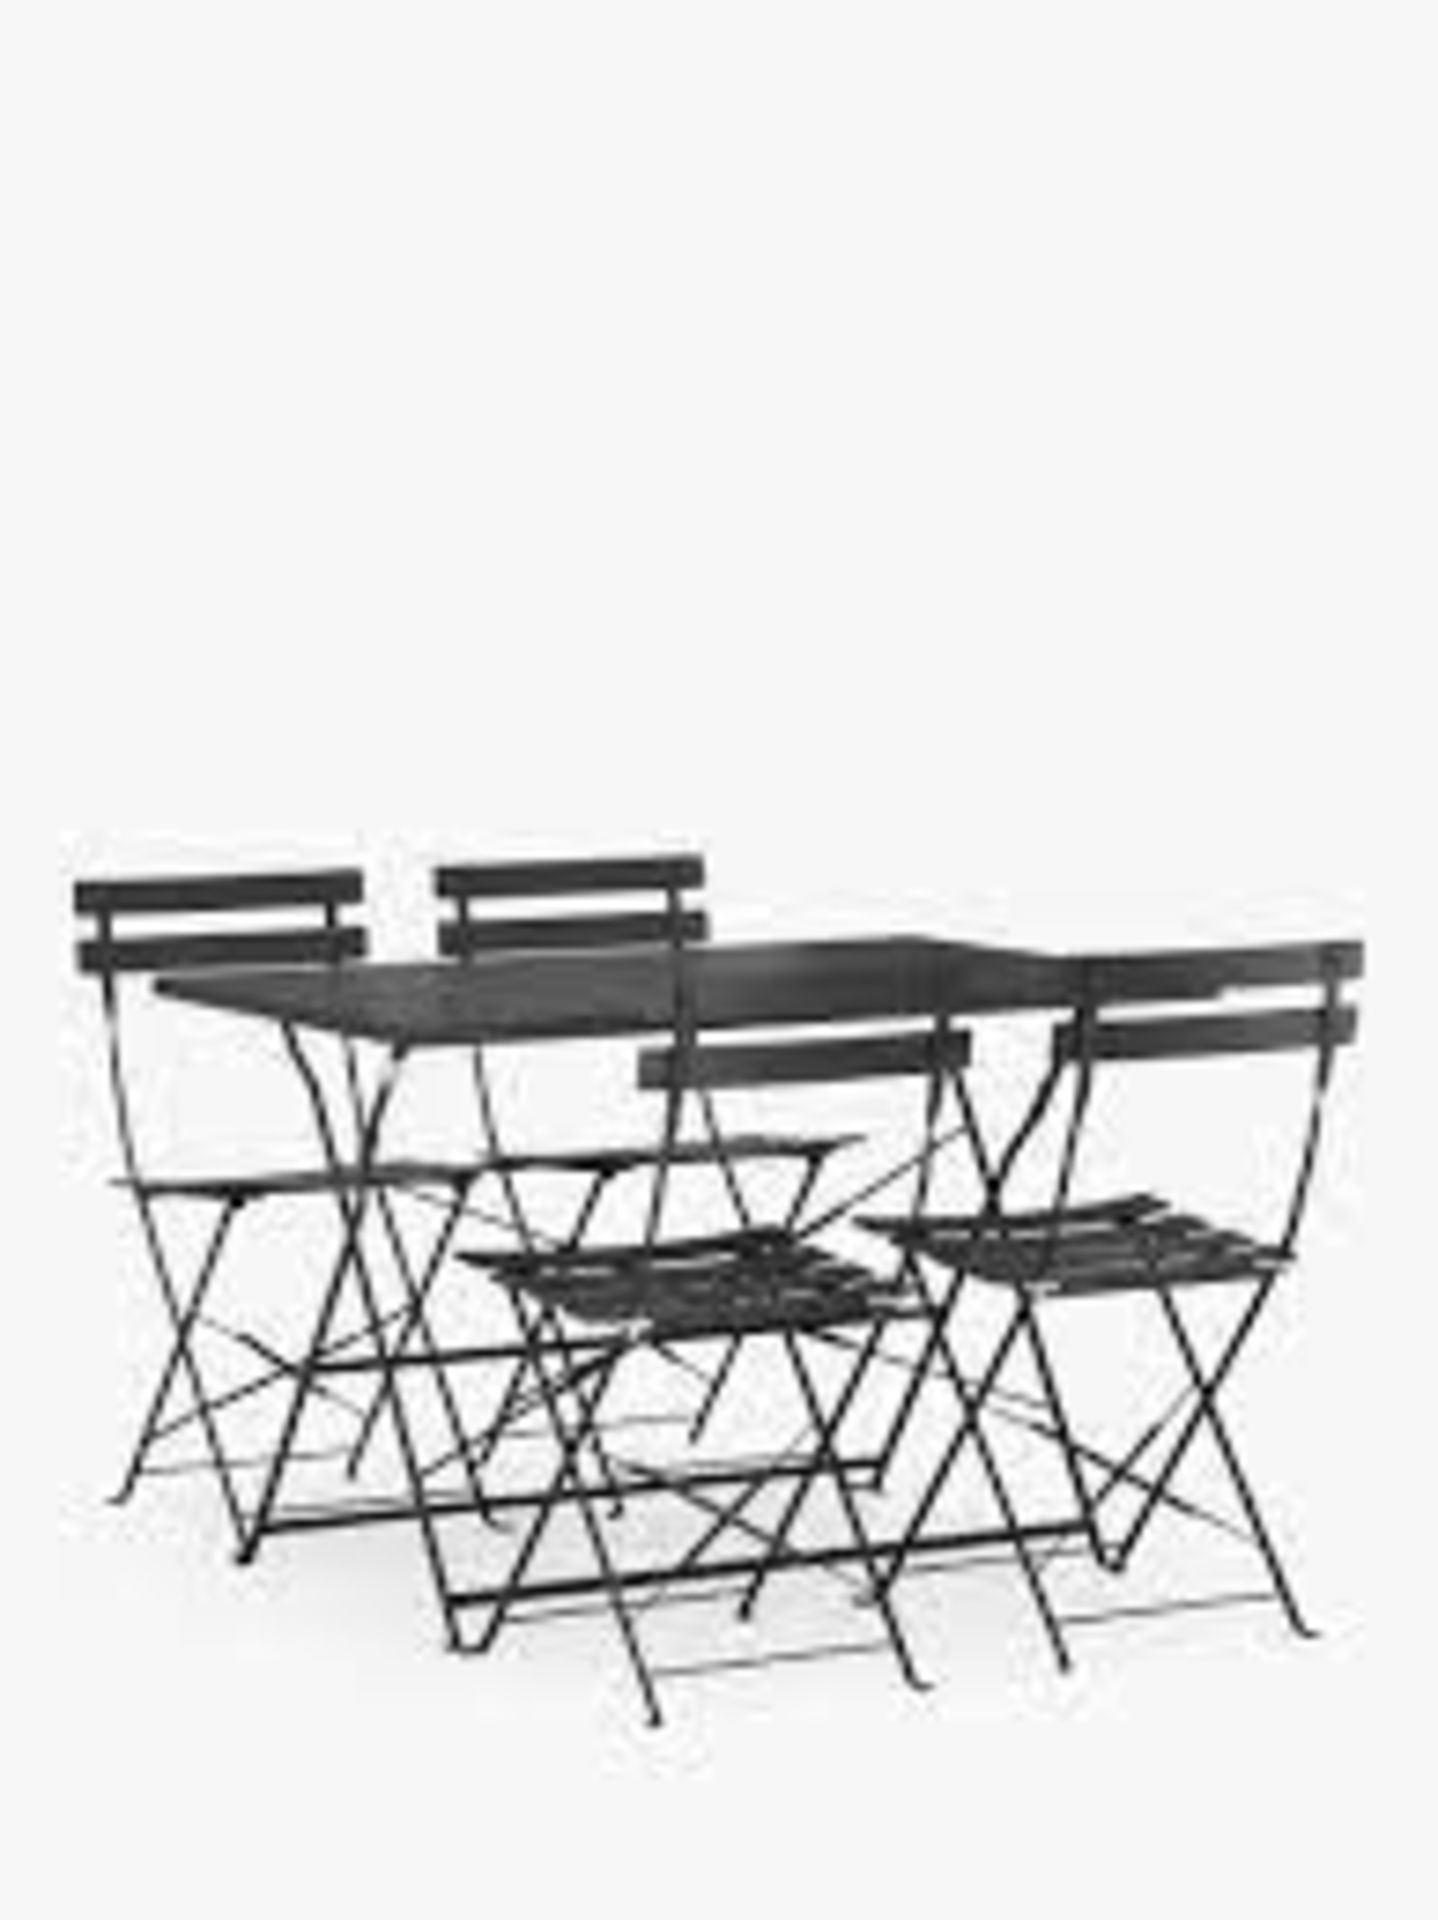 BRAND NEW JOHN LEWIS Camden 4-Seater Garden Table & Chairs Set, Grey. RRP £298.50. Create a